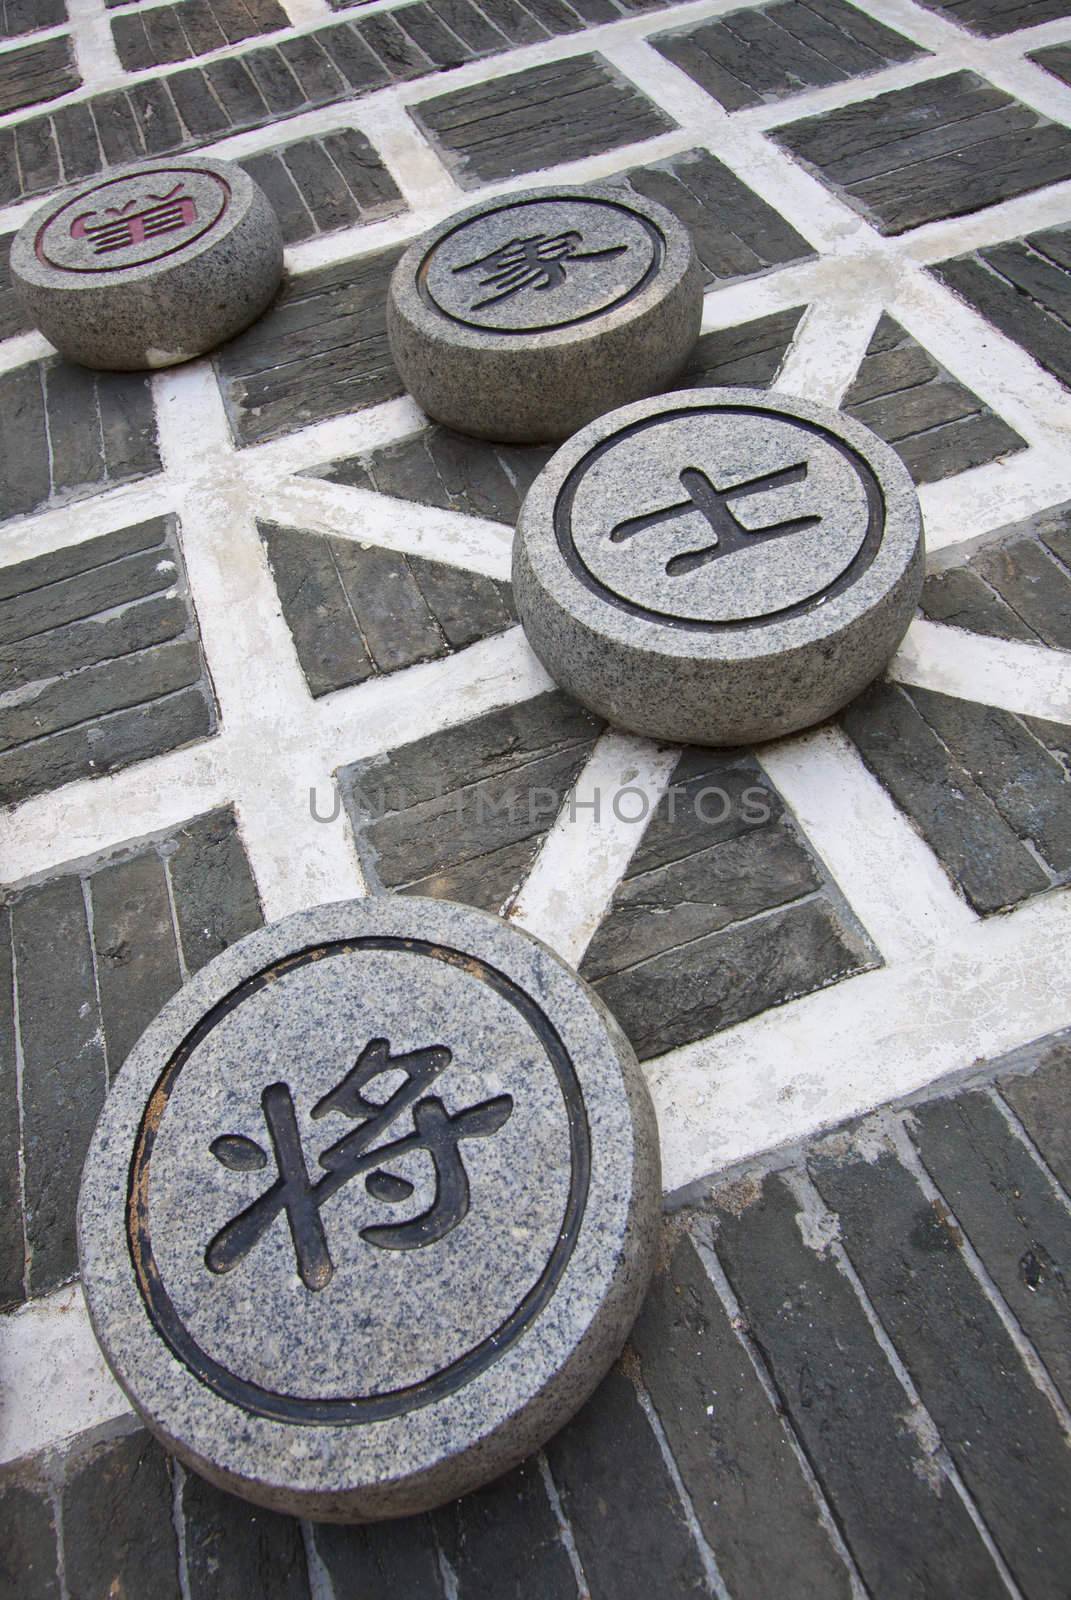 Chinese chess on the ground